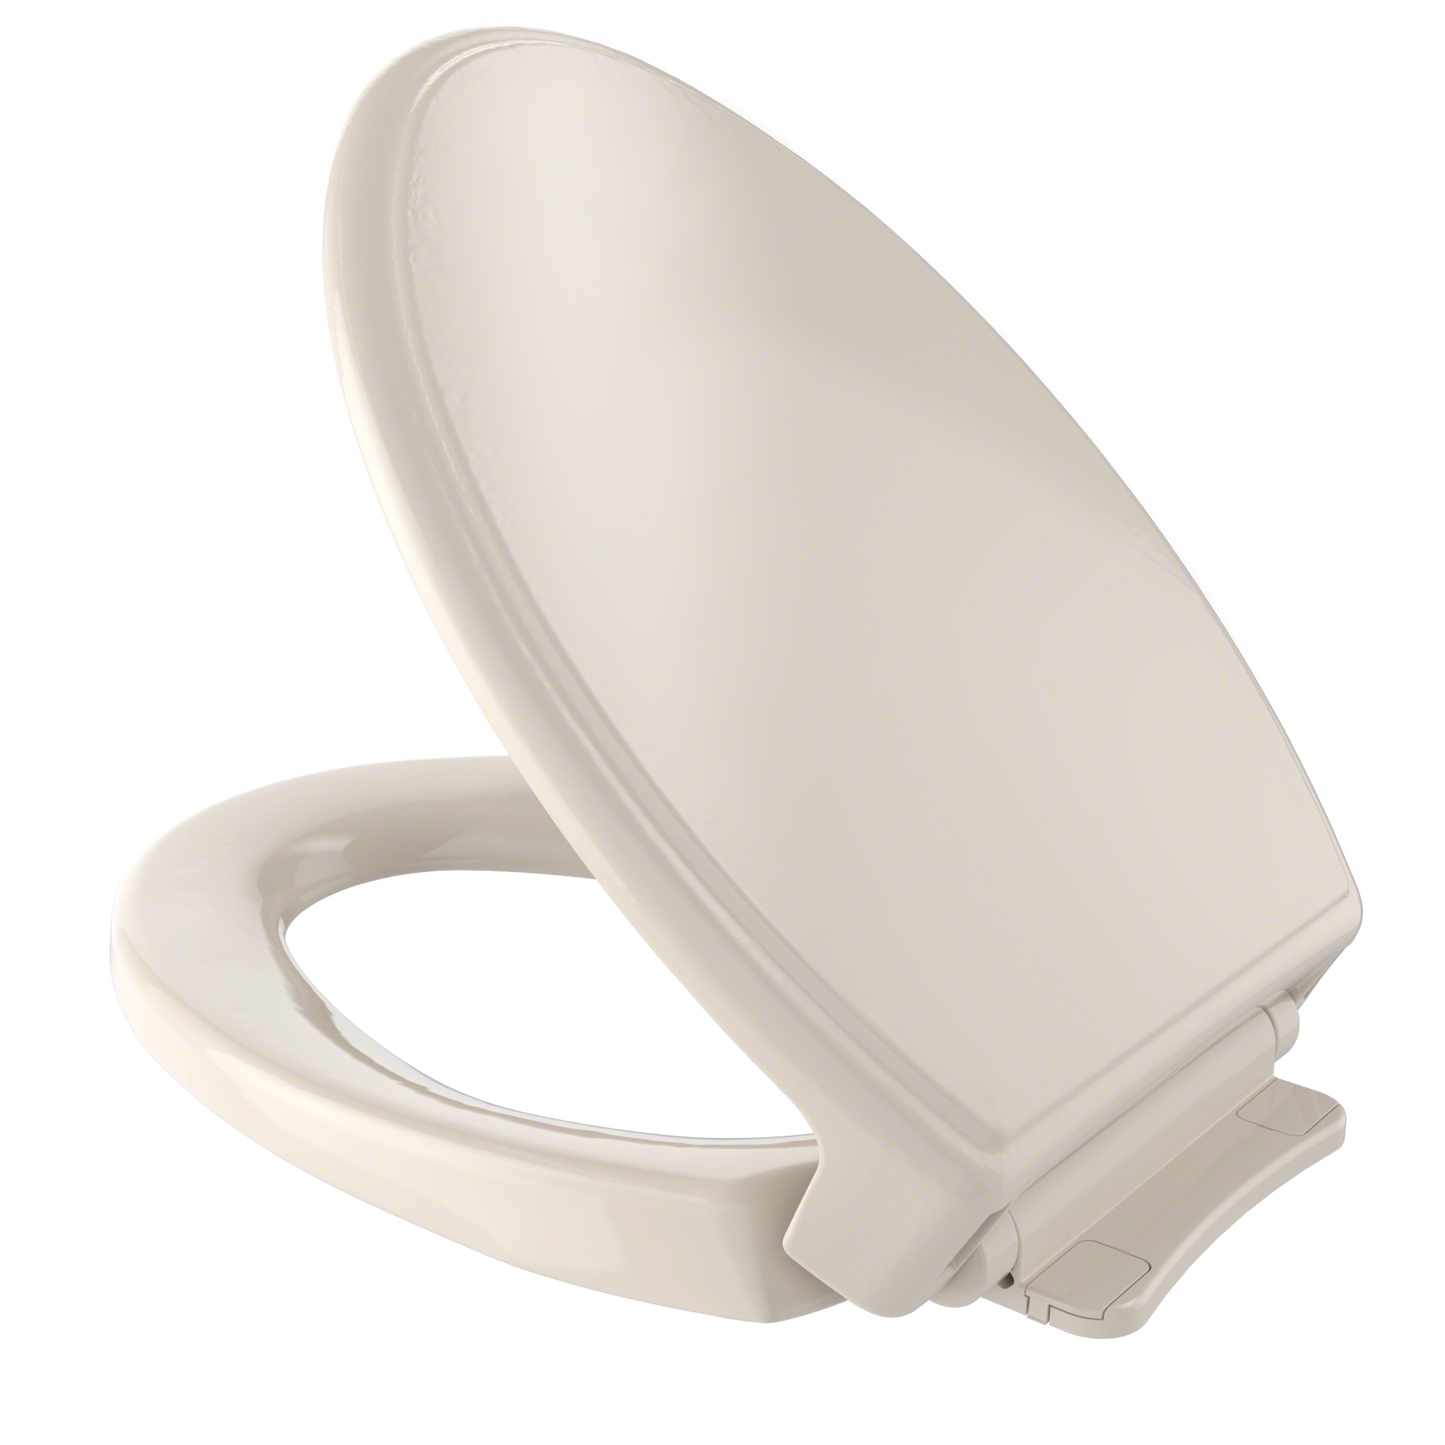 SS154#03 - Traditional SoftClose Elongated Toilet Seat - Bone